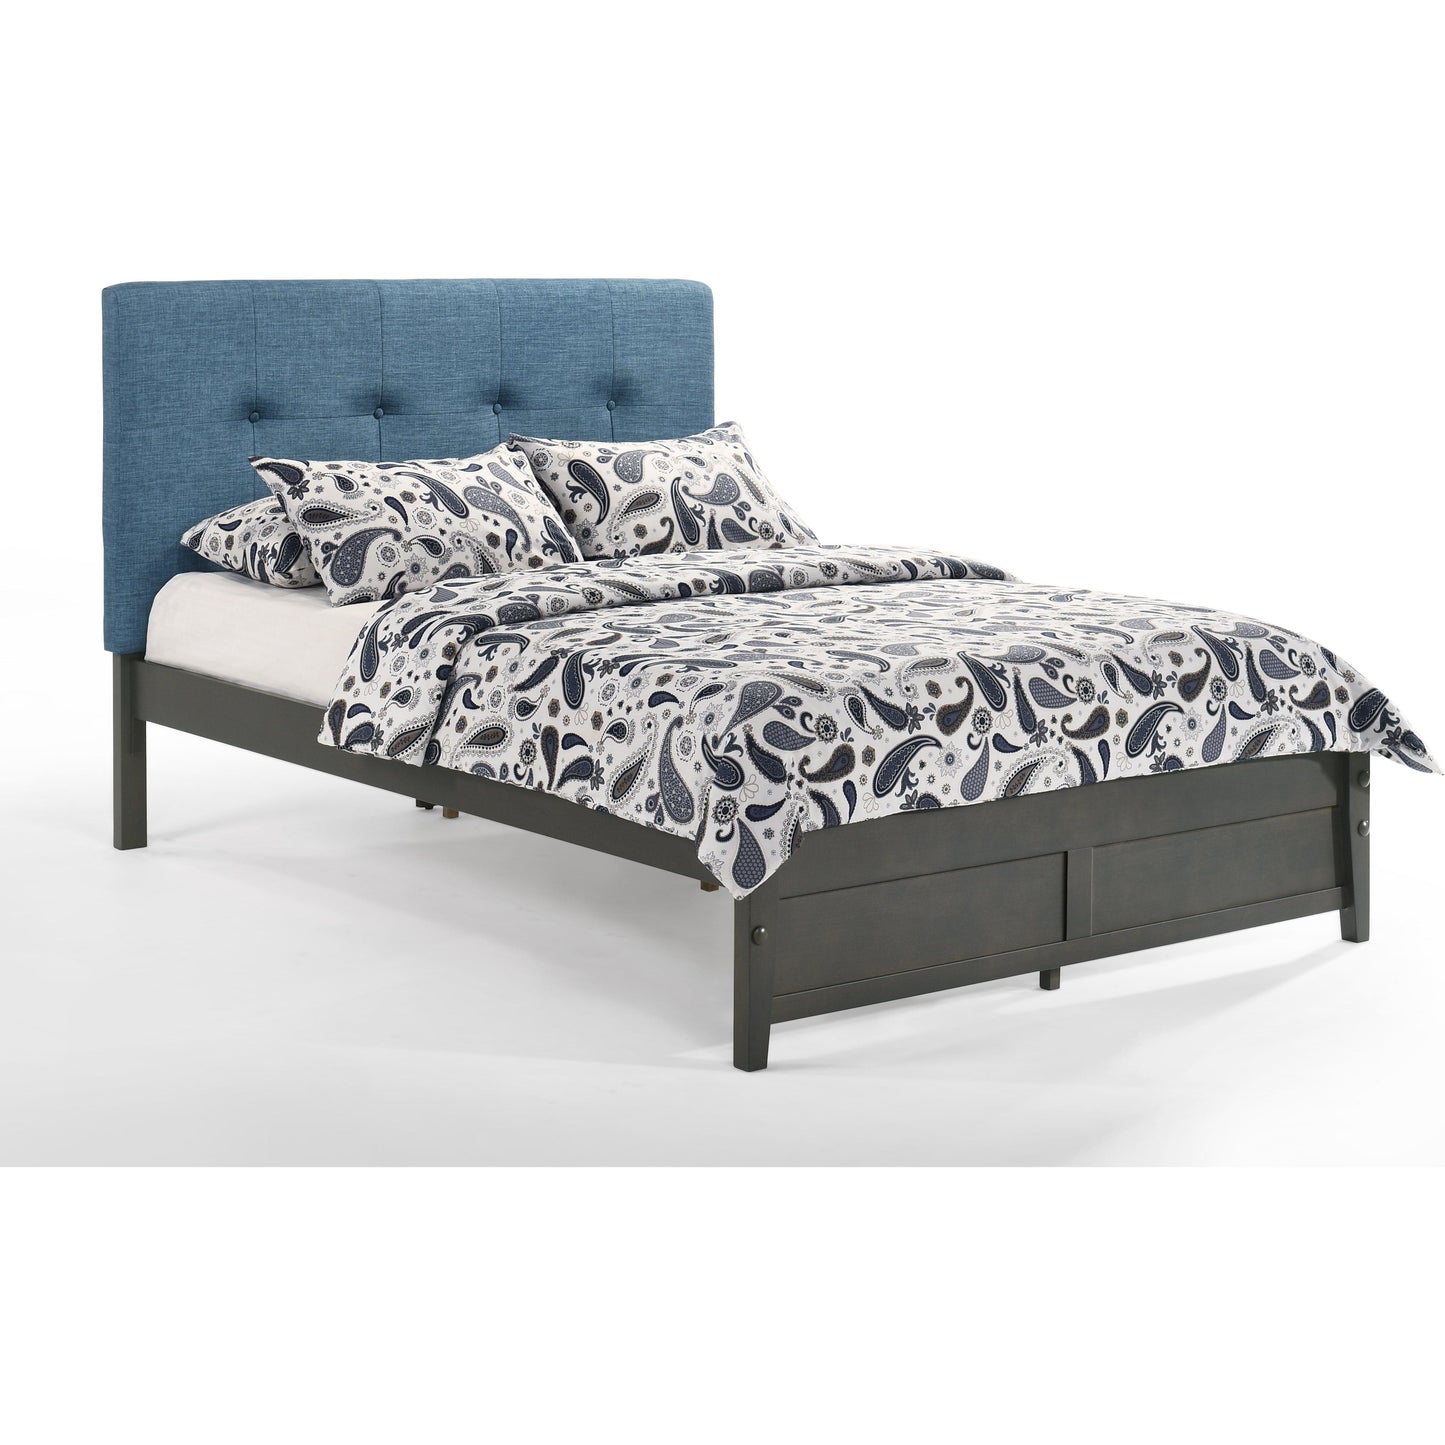 Night And Day Paprika King Bed in Teal with White Finish Frame (P Series) Stonewash PAP-PH-EKG-TL-STW-COM